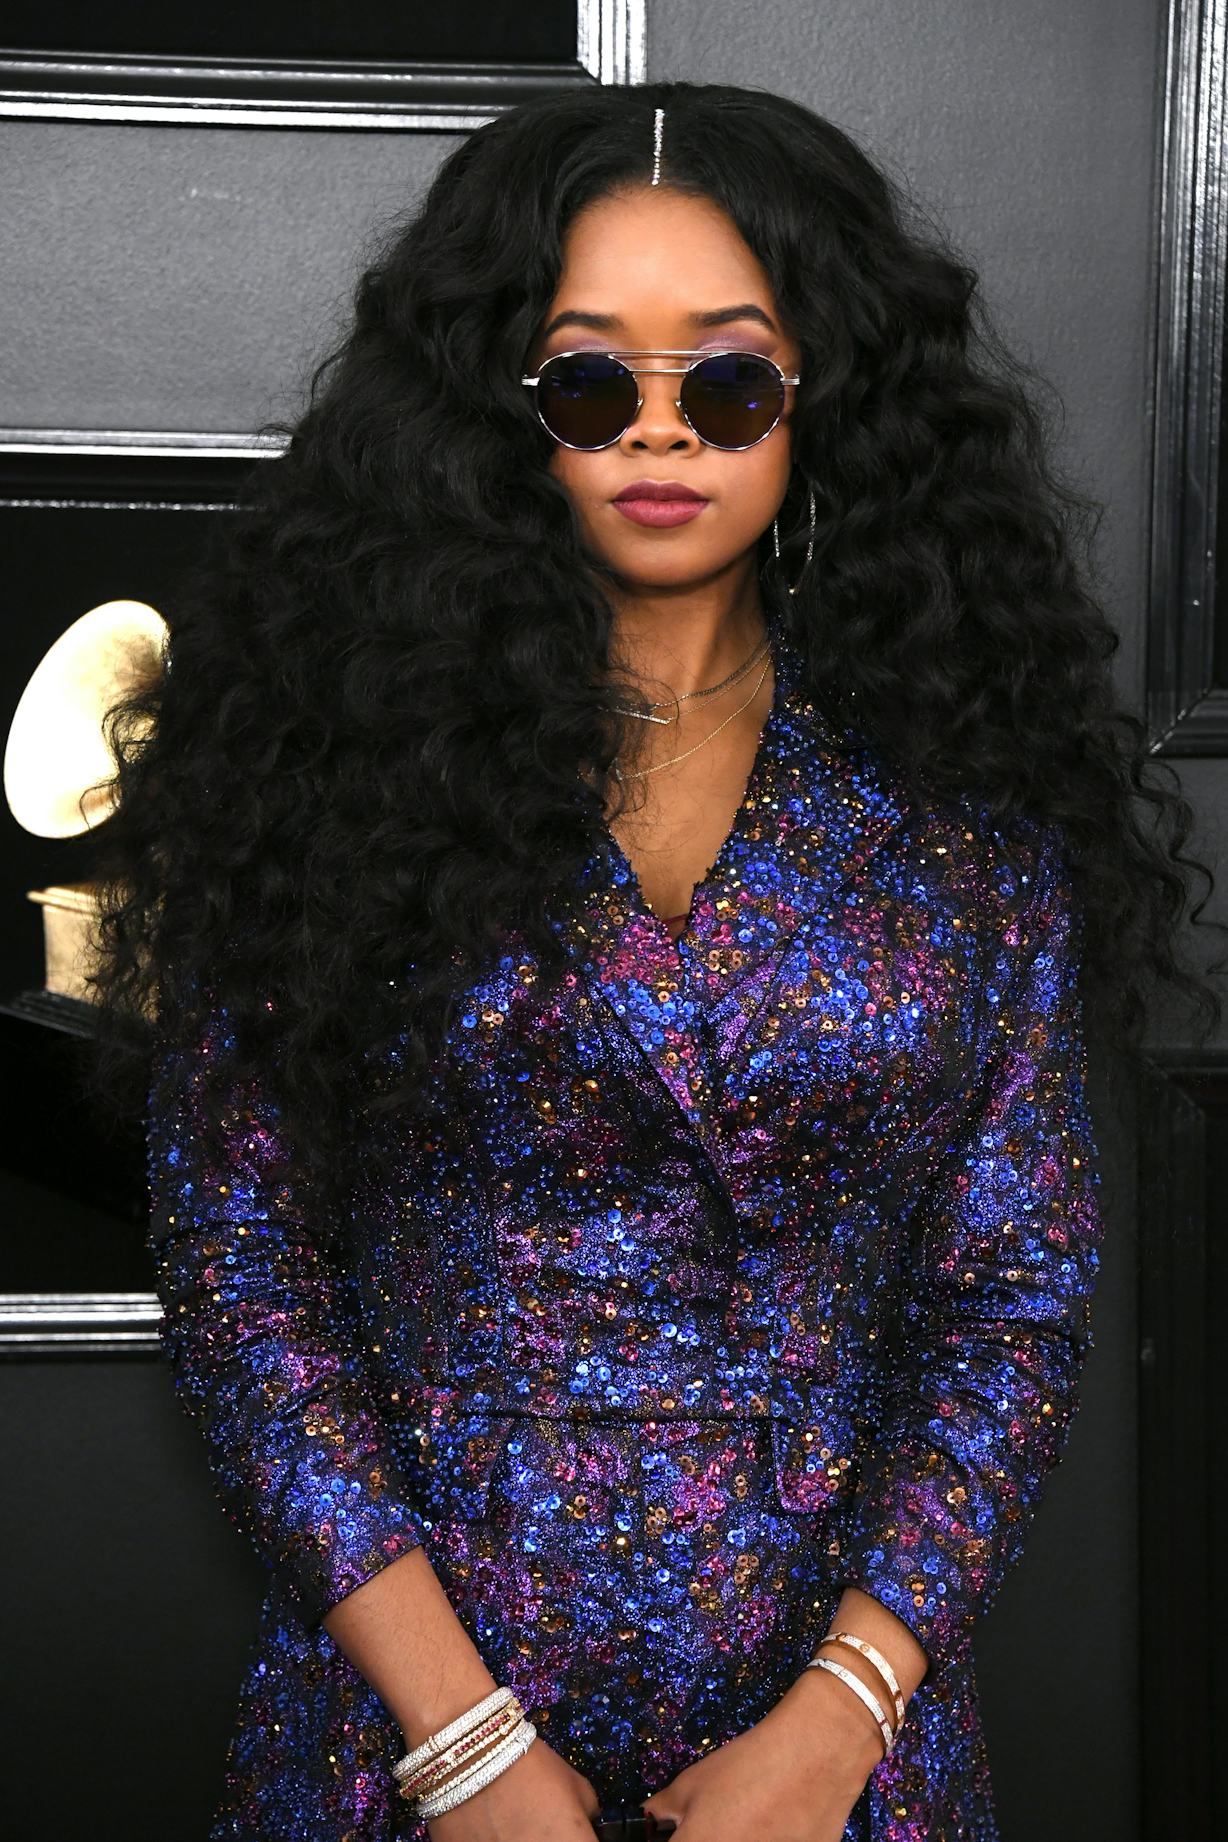 Who Is H.E.R.? Meet The Artist Who Took Home Best R&B Album At The 2019